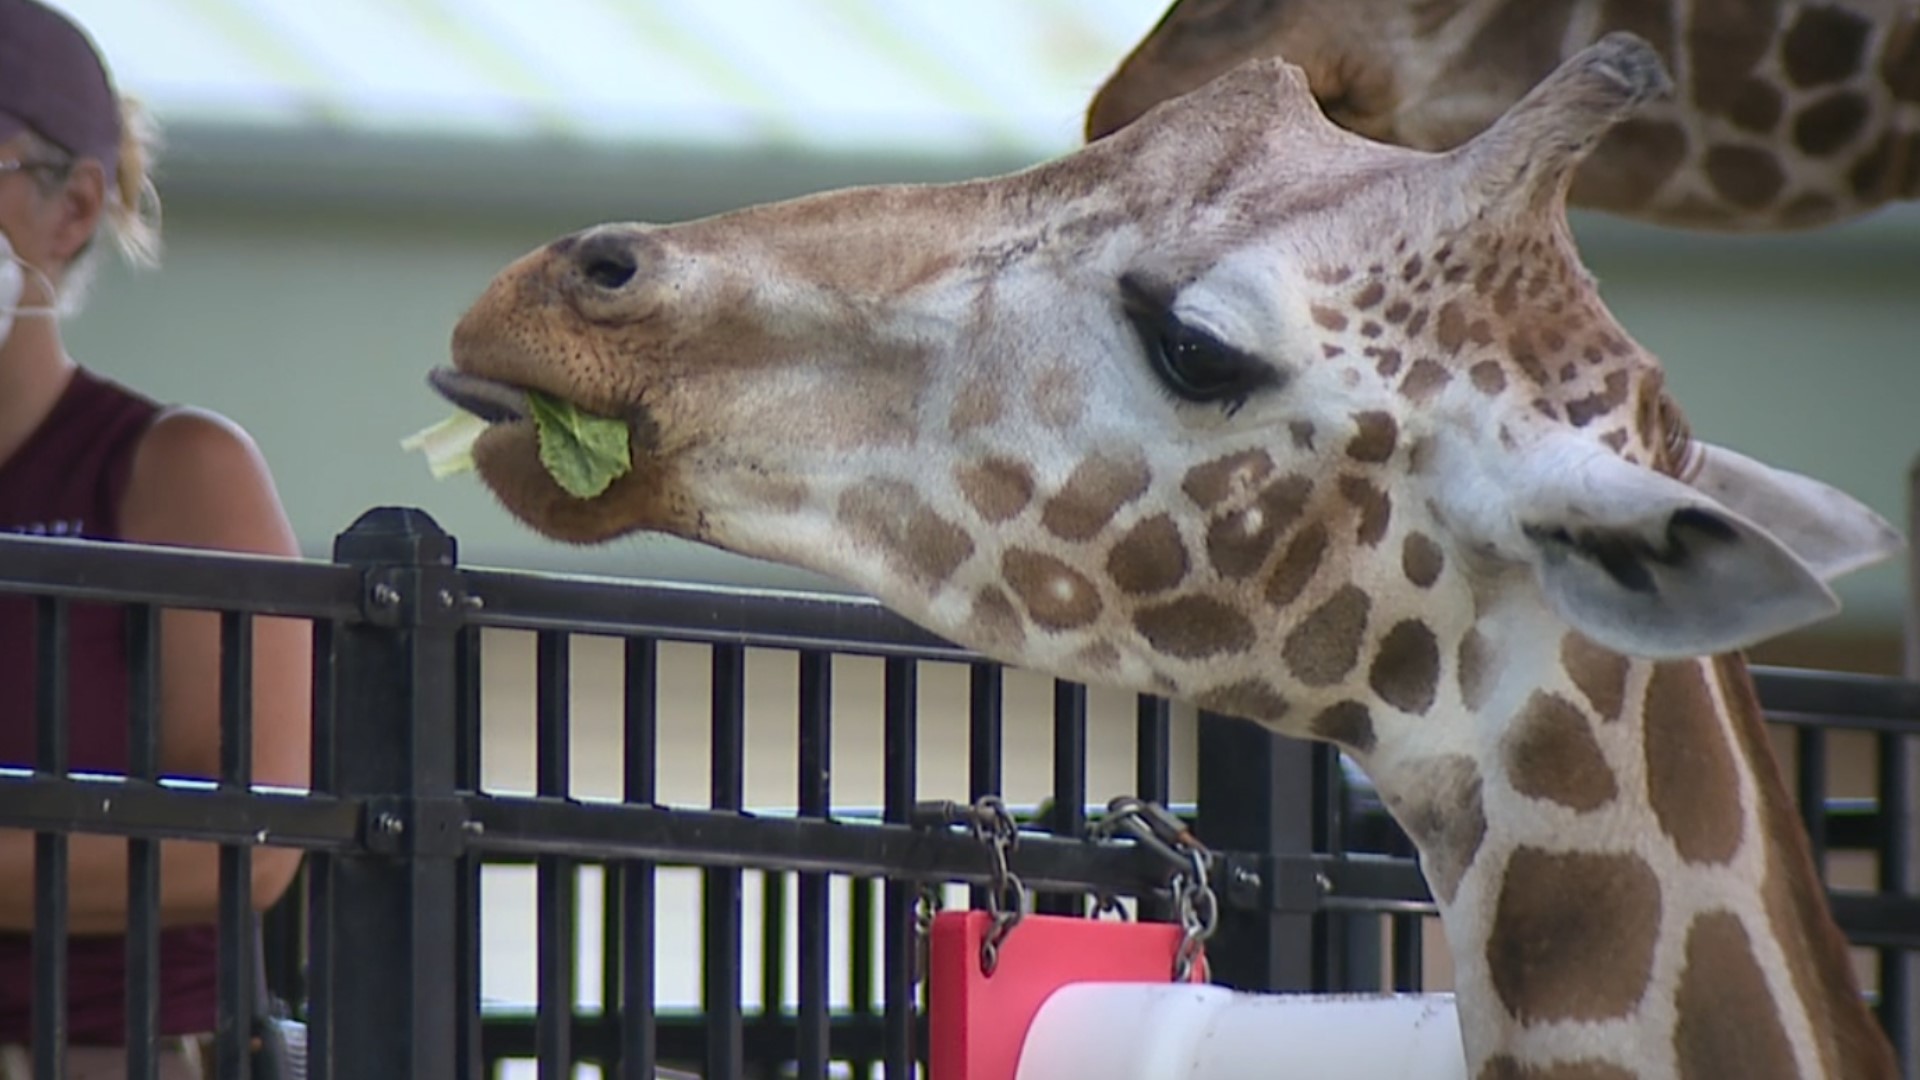 Zoo officials estimate Niabi's current food costs have risen by tens of thousands of dollars. Still, keepers say they won't skimp on the animals' diets.